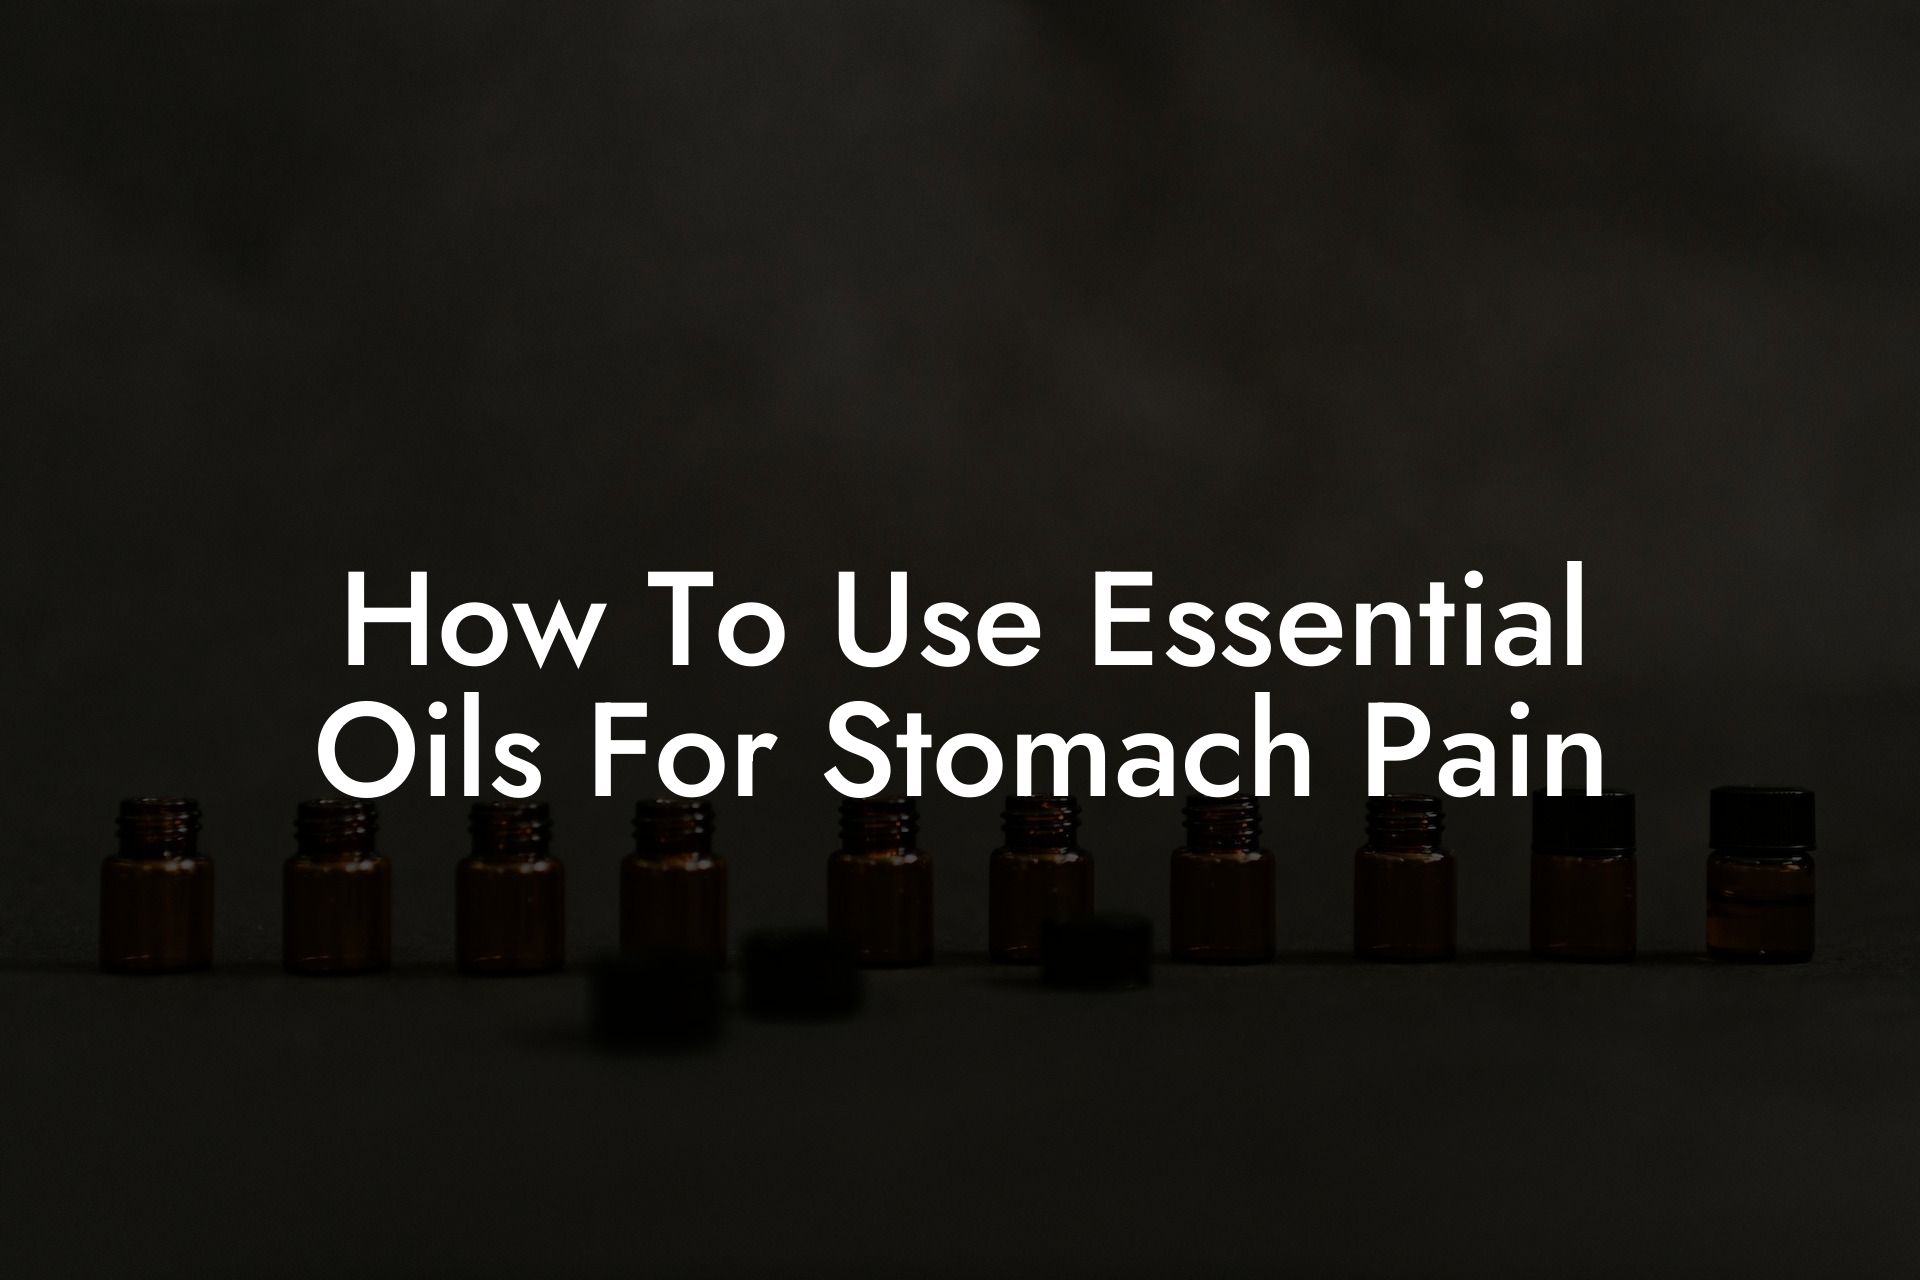 How To Use Essential Oils For Stomach Pain